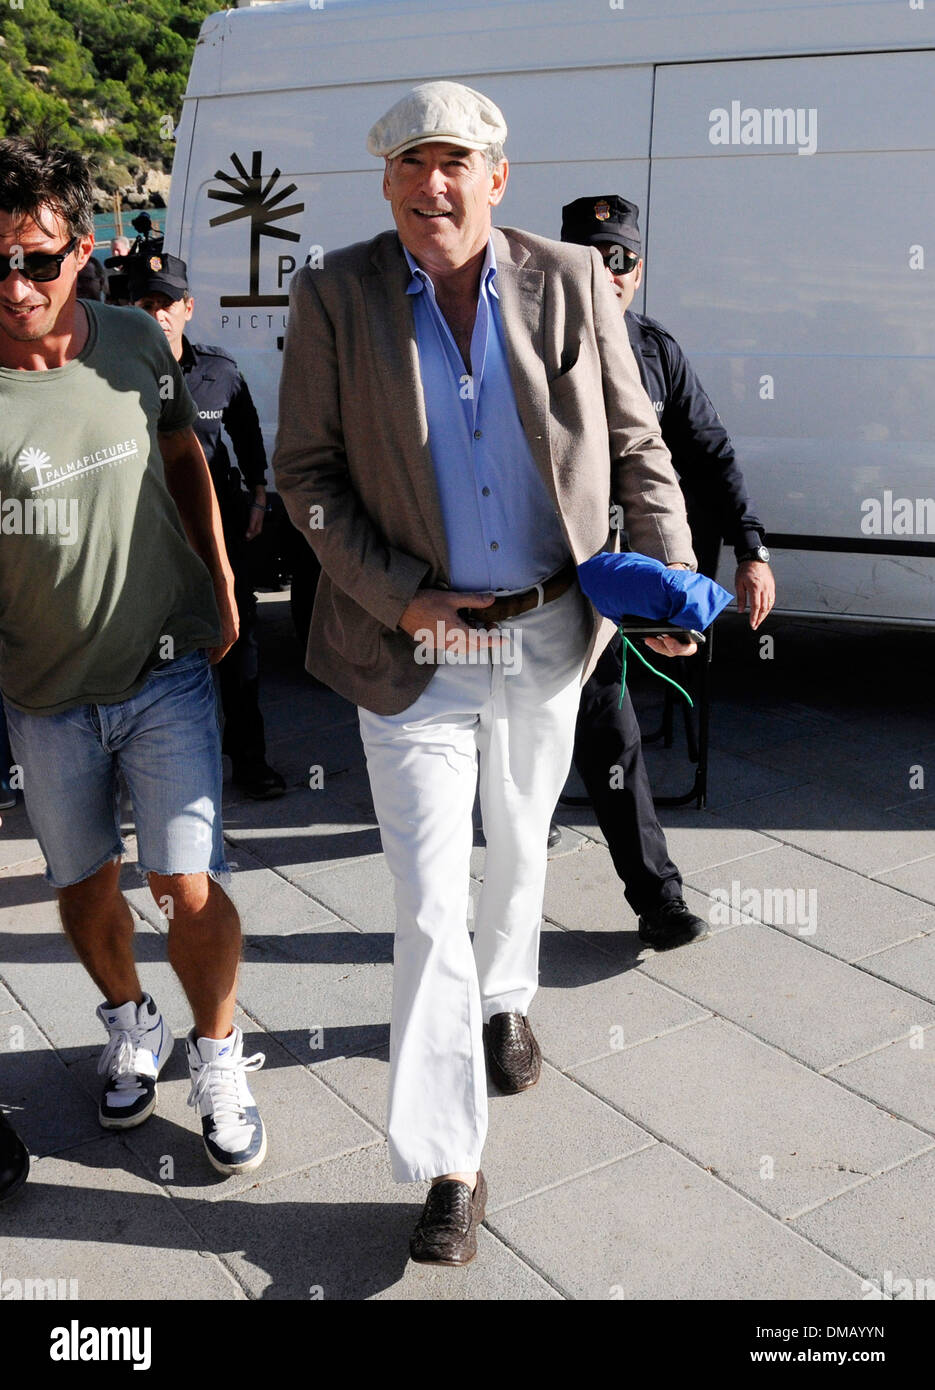 Actor Pierce Brosnan on the set of the movie 'A long way down'. Shot in Mallorca in October 2012. Stock Photo